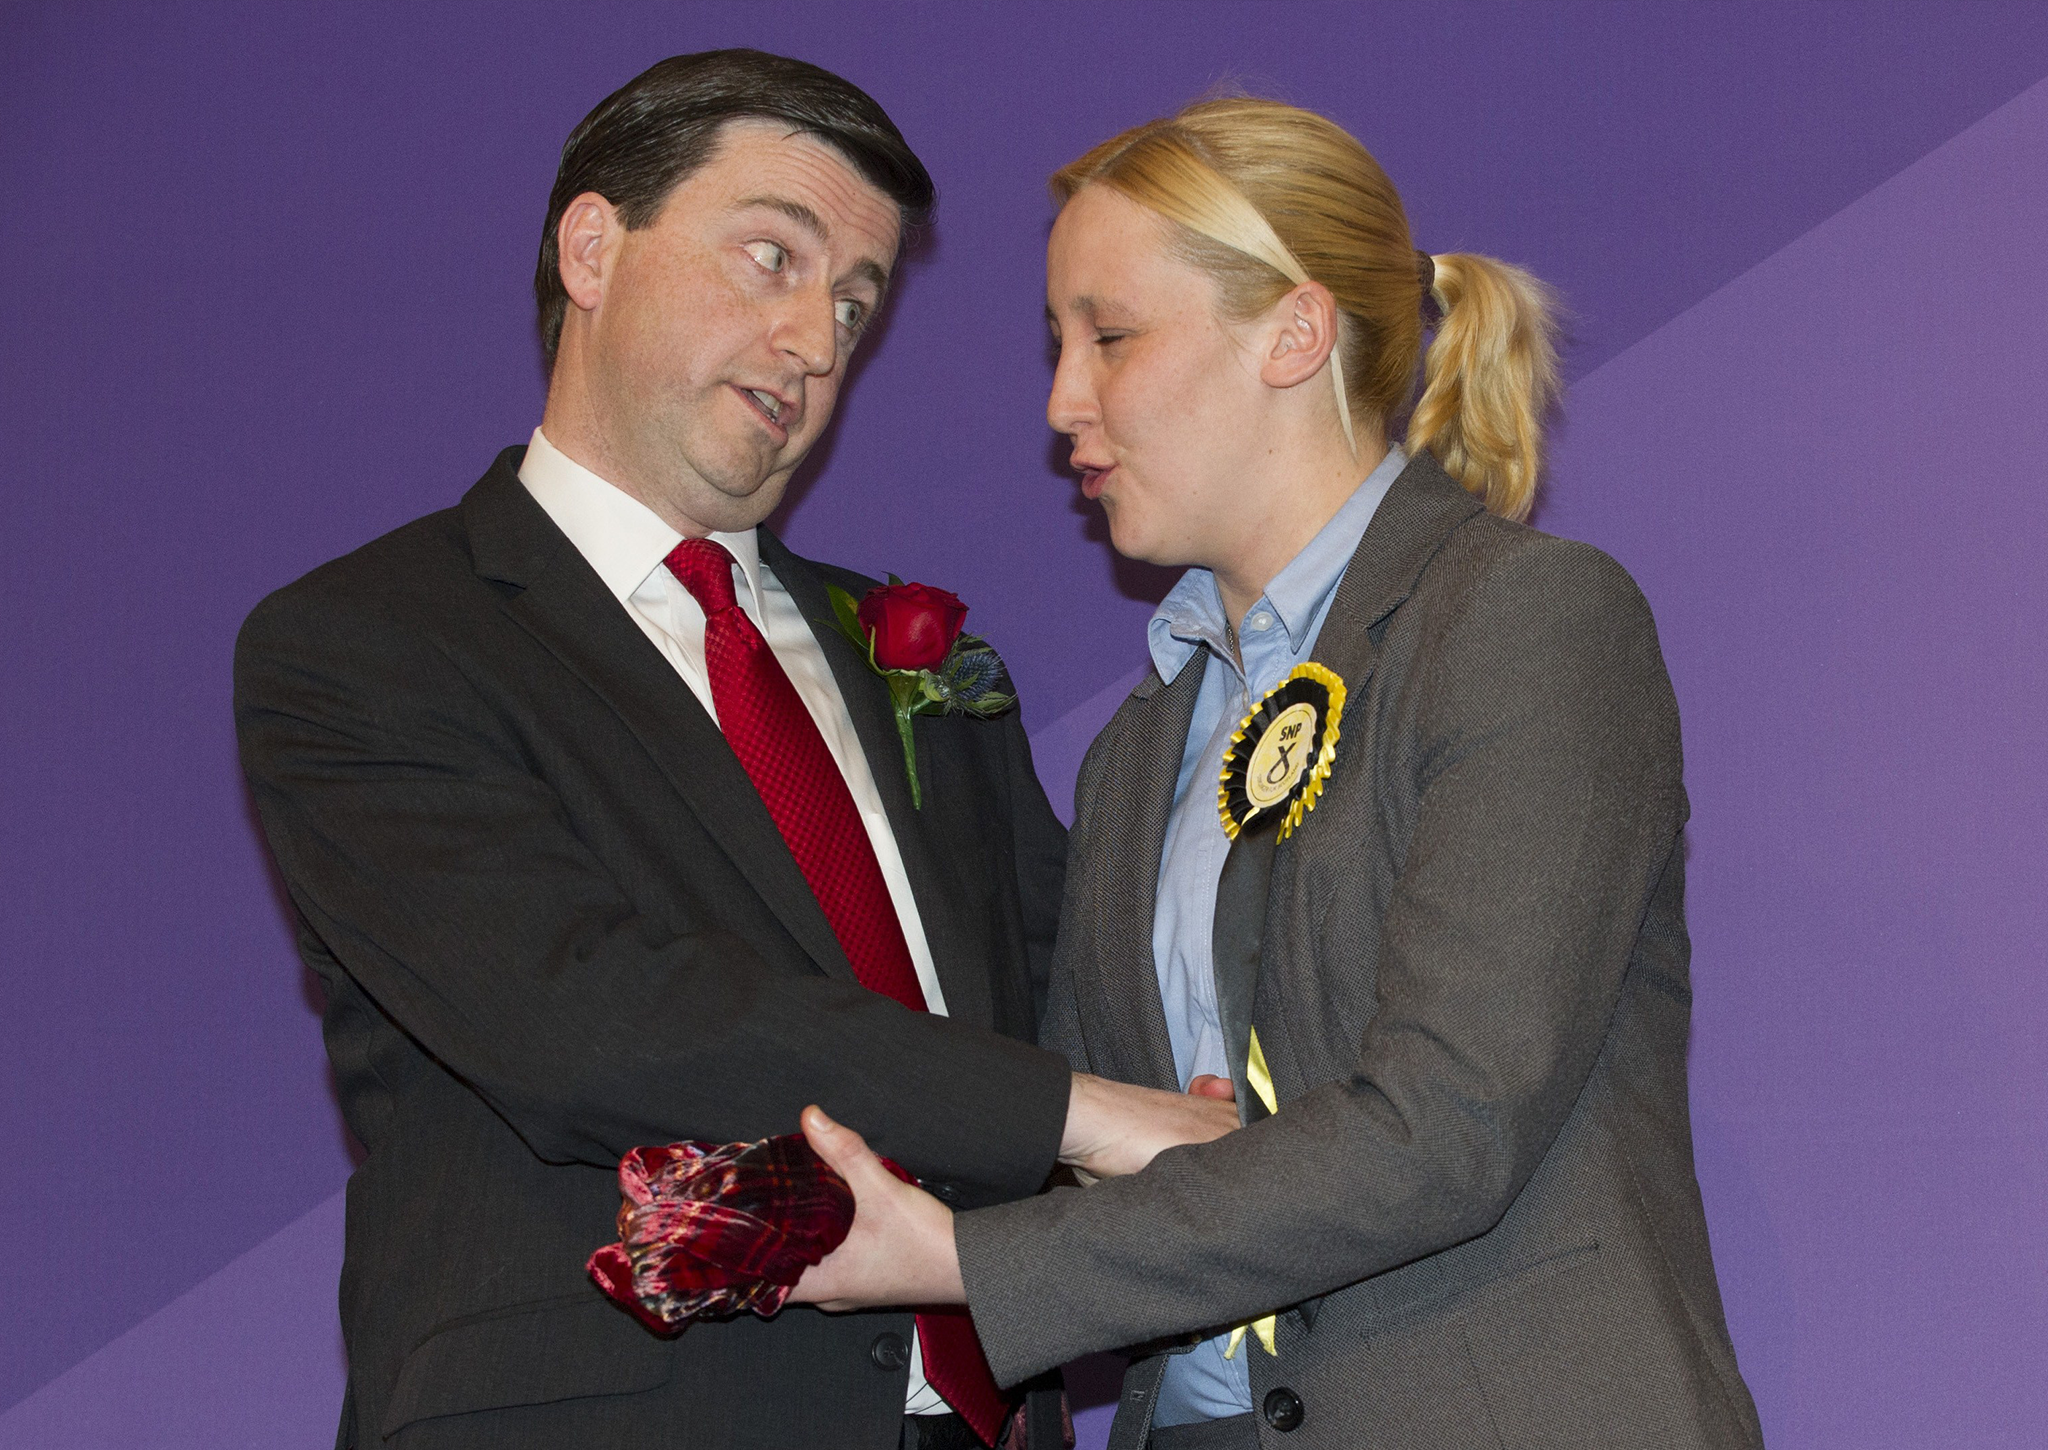 Mhairi Black, Britain's youngest member of parliament since 1667, greets Labour candidate Douglas Alexander during the declaration of the general election results for Paisley and Renfrewshire South